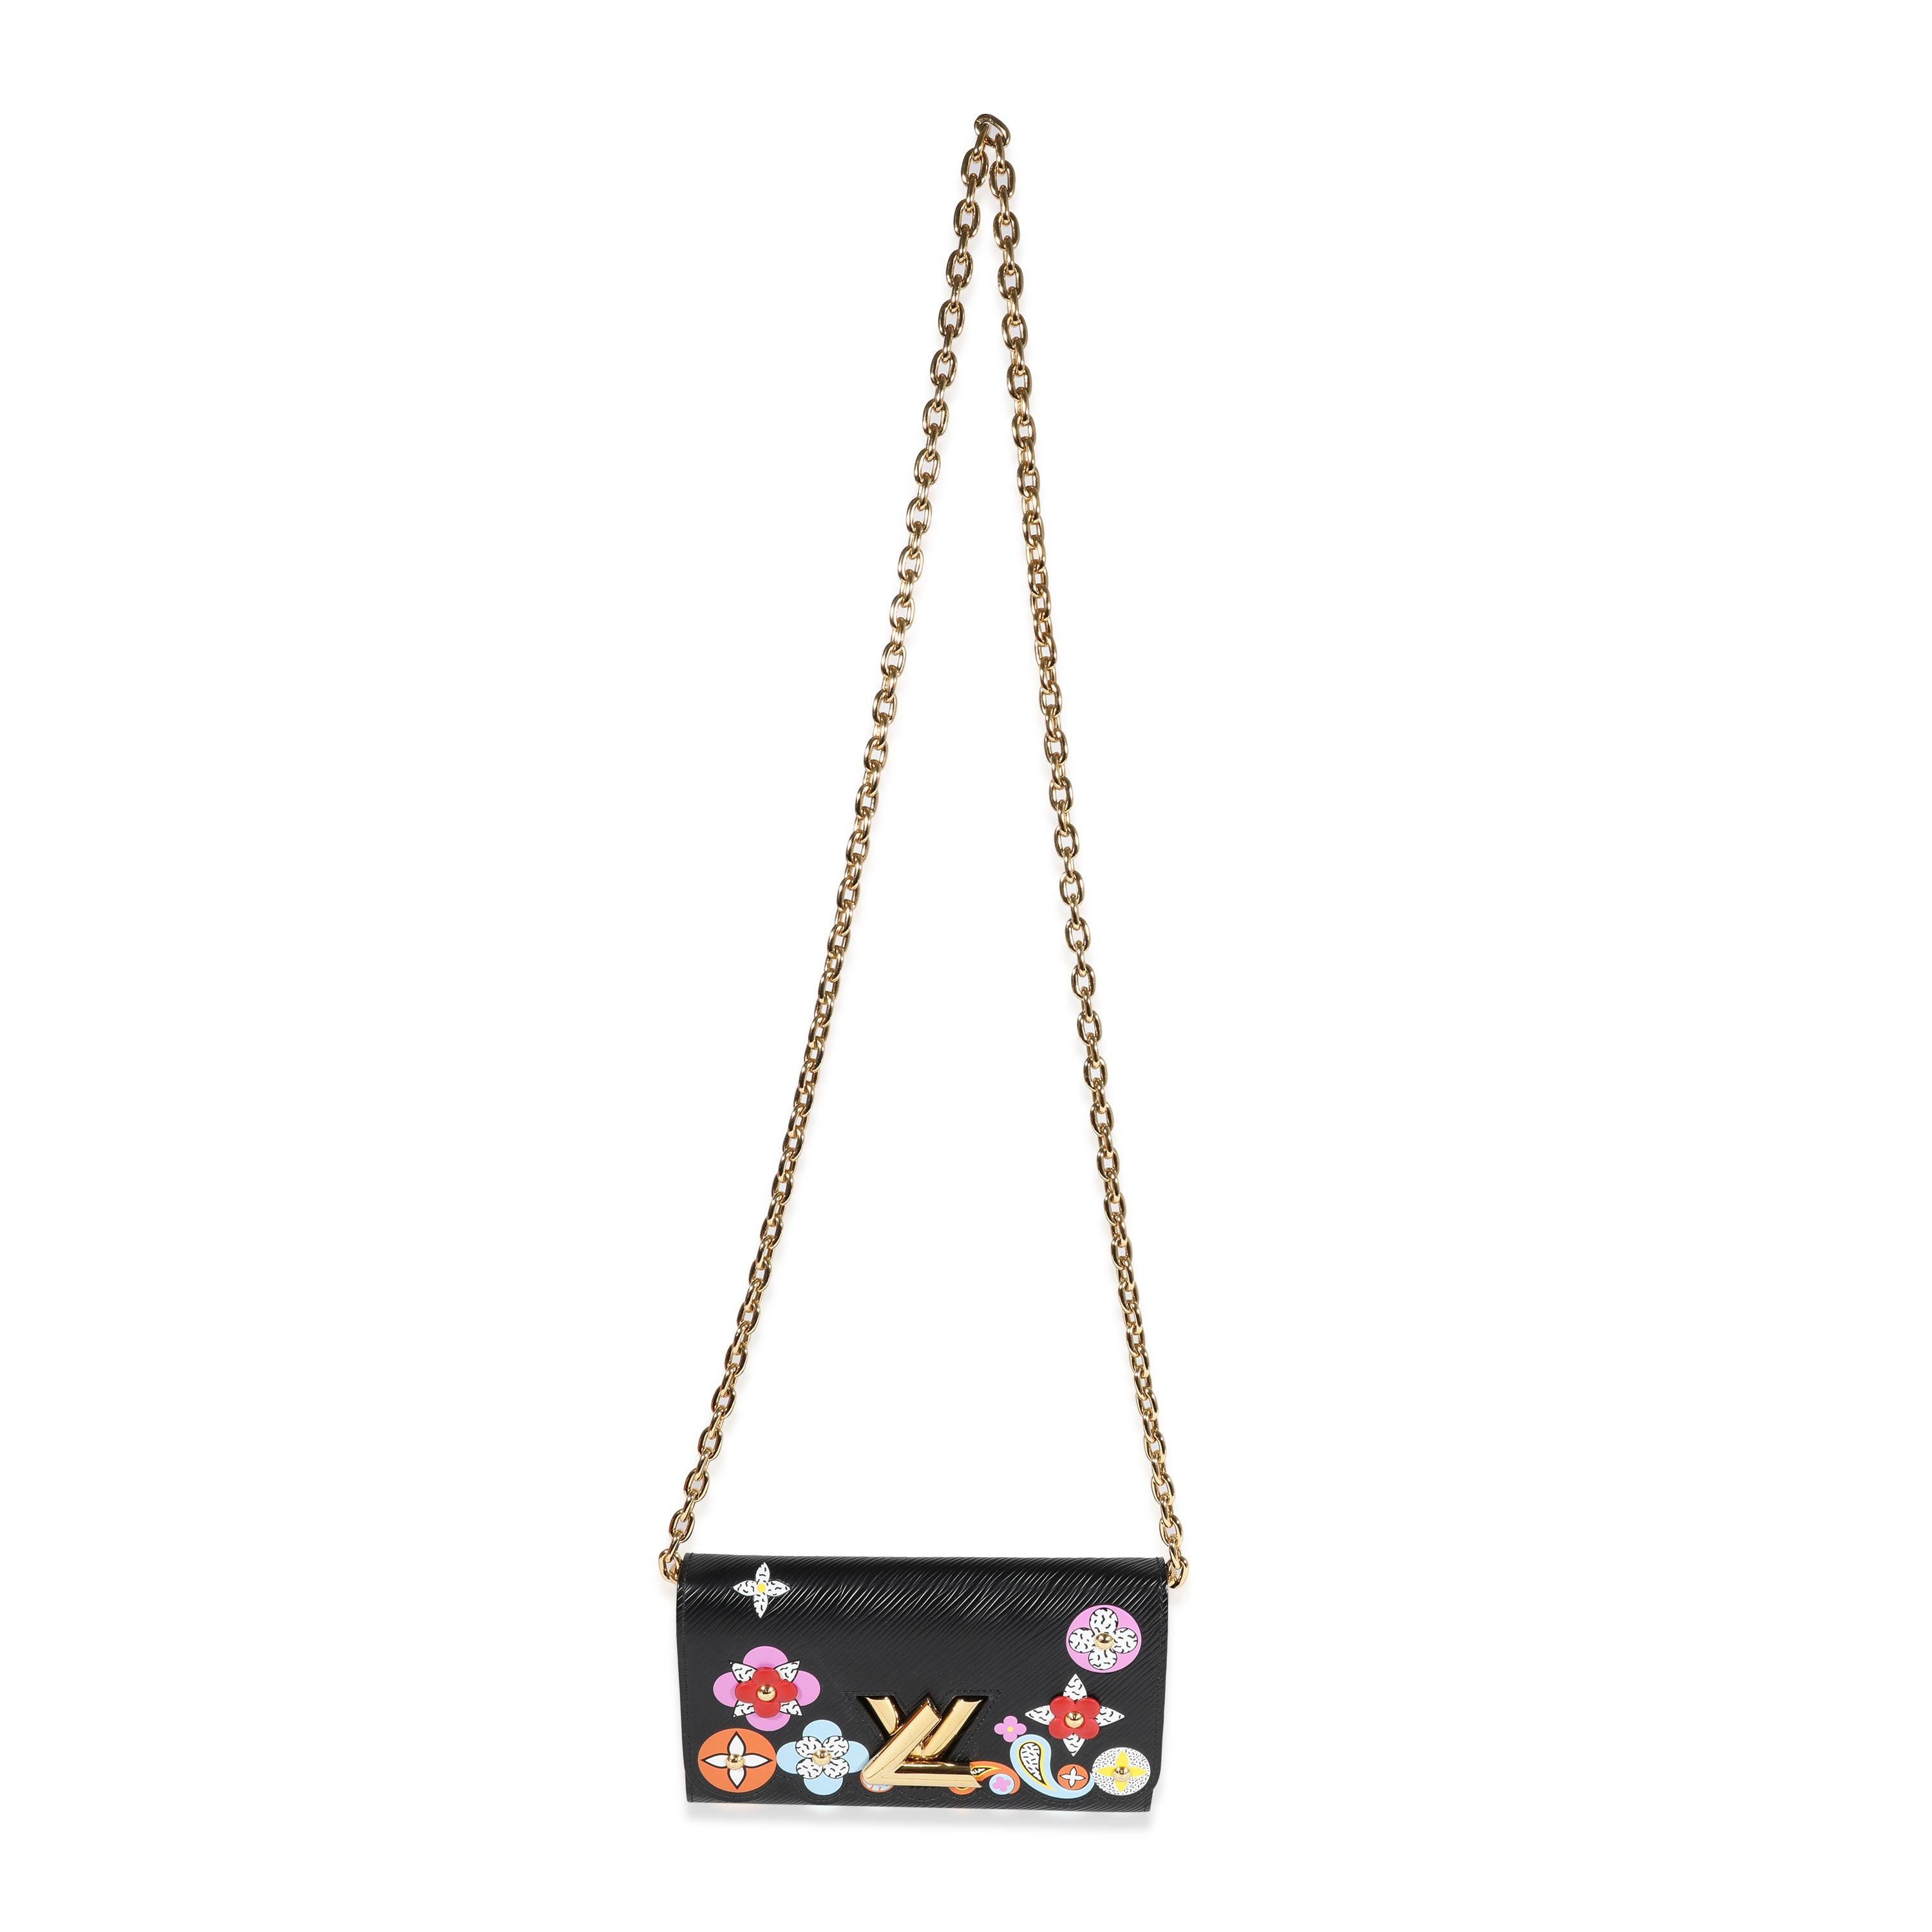 Listing Title: Louis Vuitton Black Blooming Flowers Epi Twist Chain Wallet
SKU: 121728
MSRP: 1910.00
Condition: Pre-owned 
Handbag Condition: Very Good
Condition Comments: Very Good Condition. Scuffing and discoloration at exterior. Scratching to